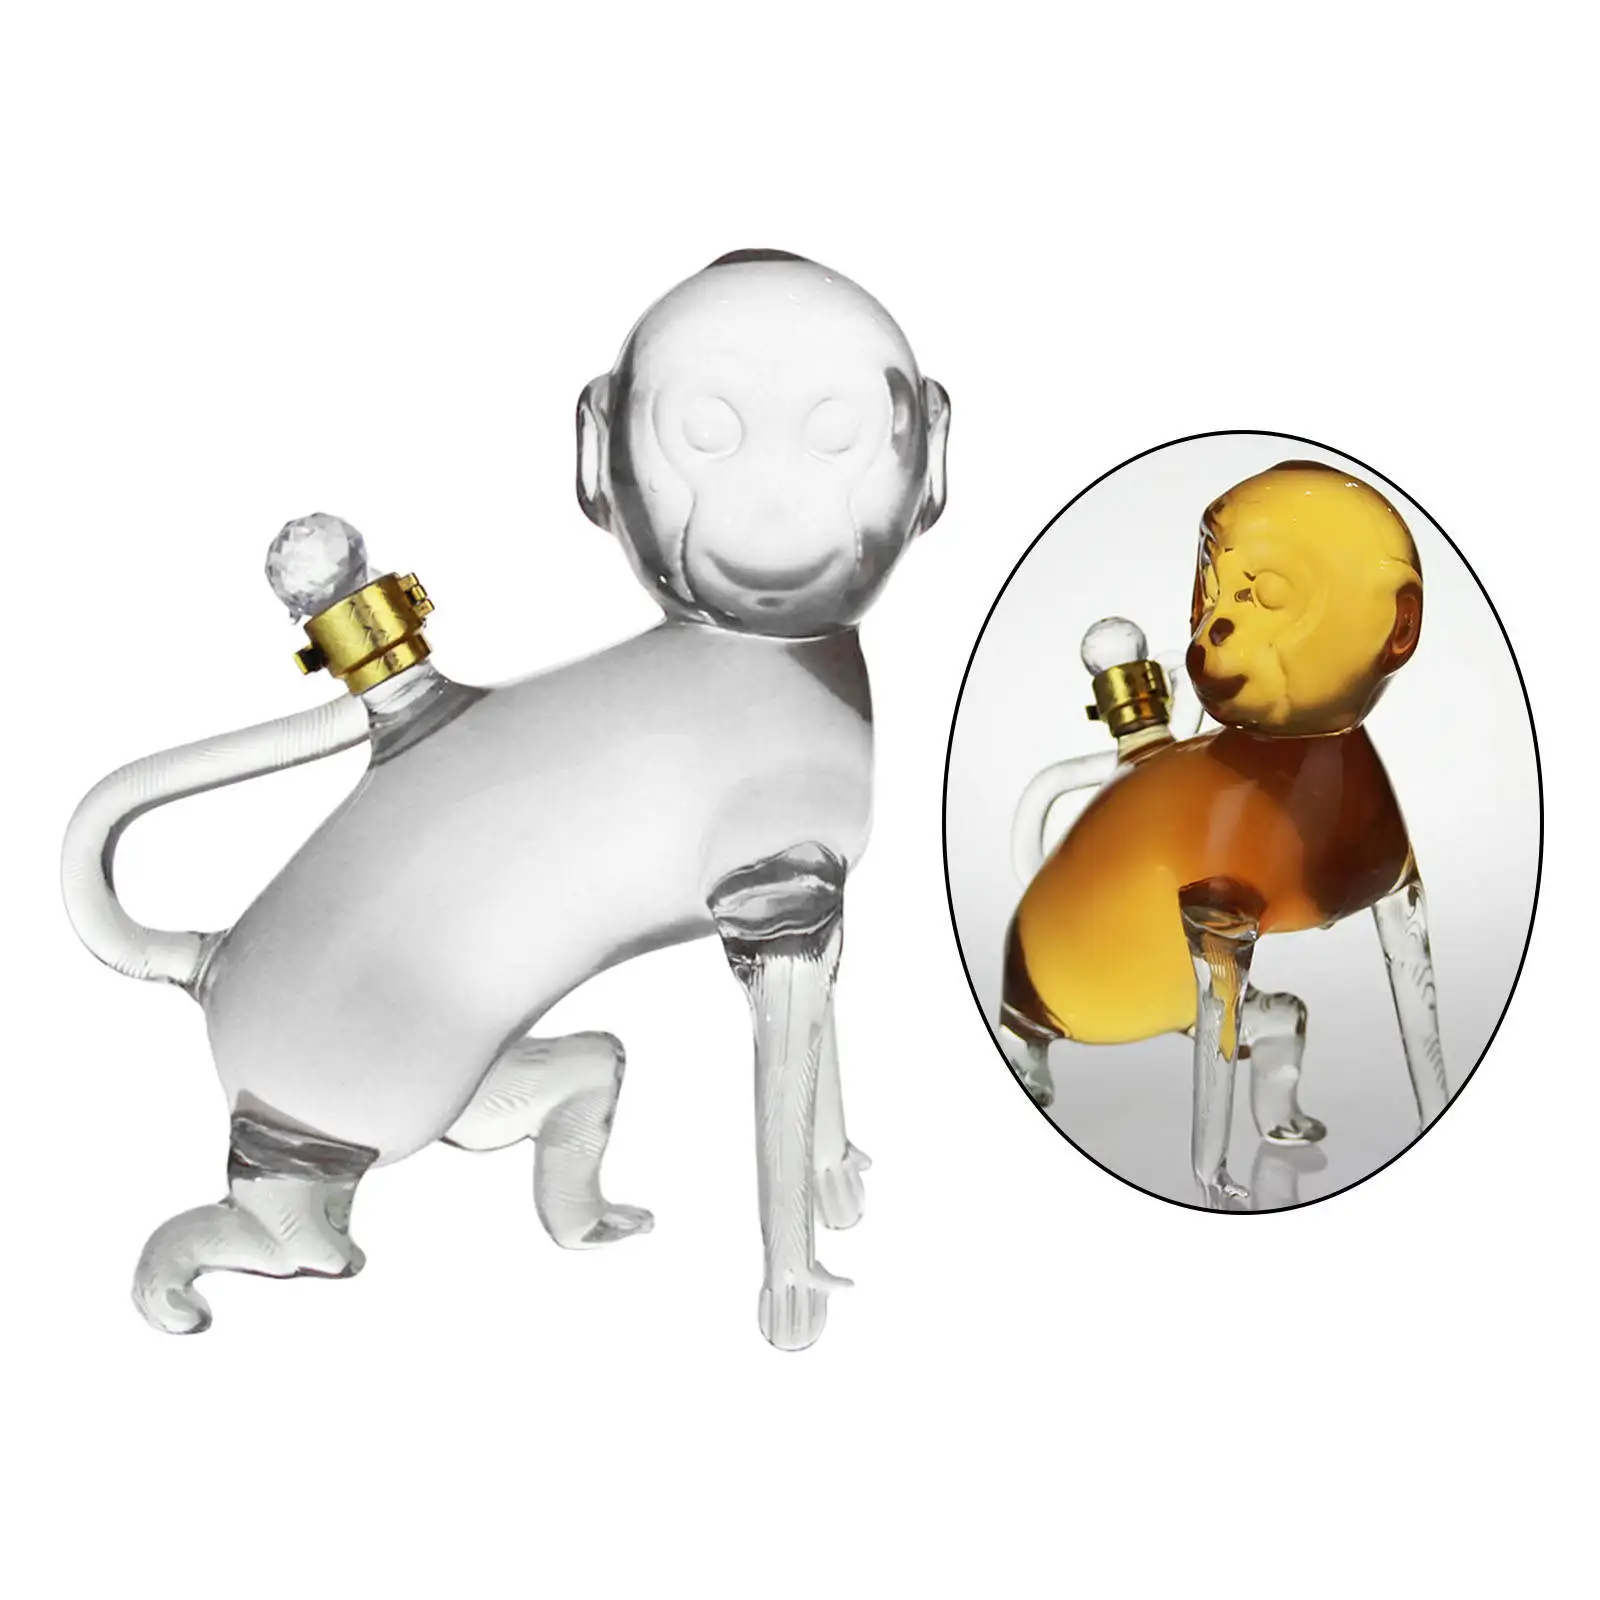 Monkey Design Whisky Decanter Transparent Liquor Decanter for Xmas Present Holiday Gifts